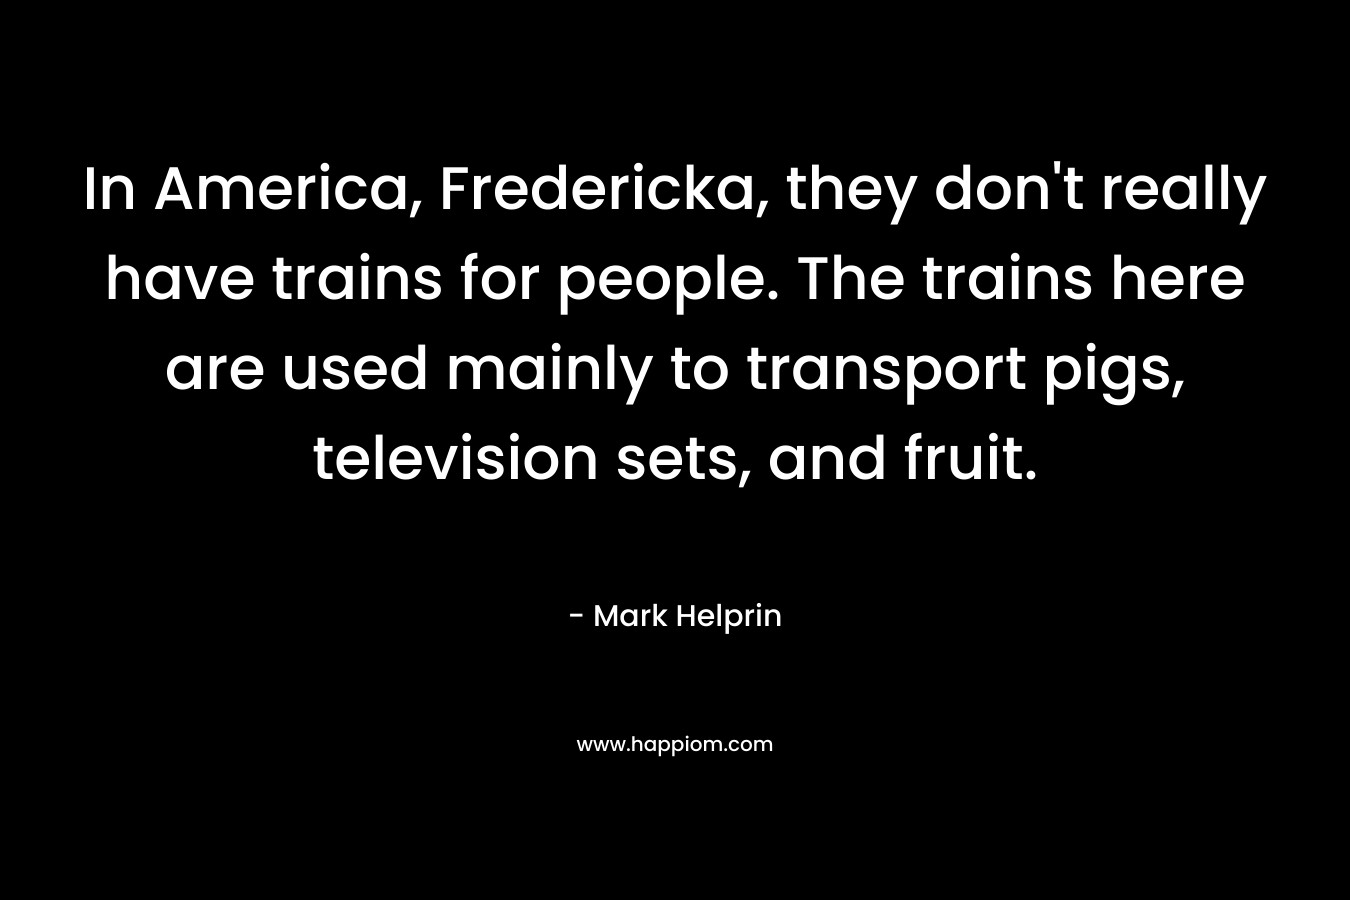 In America, Fredericka, they don’t really have trains for people. The trains here are used mainly to transport pigs, television sets, and fruit. – Mark Helprin